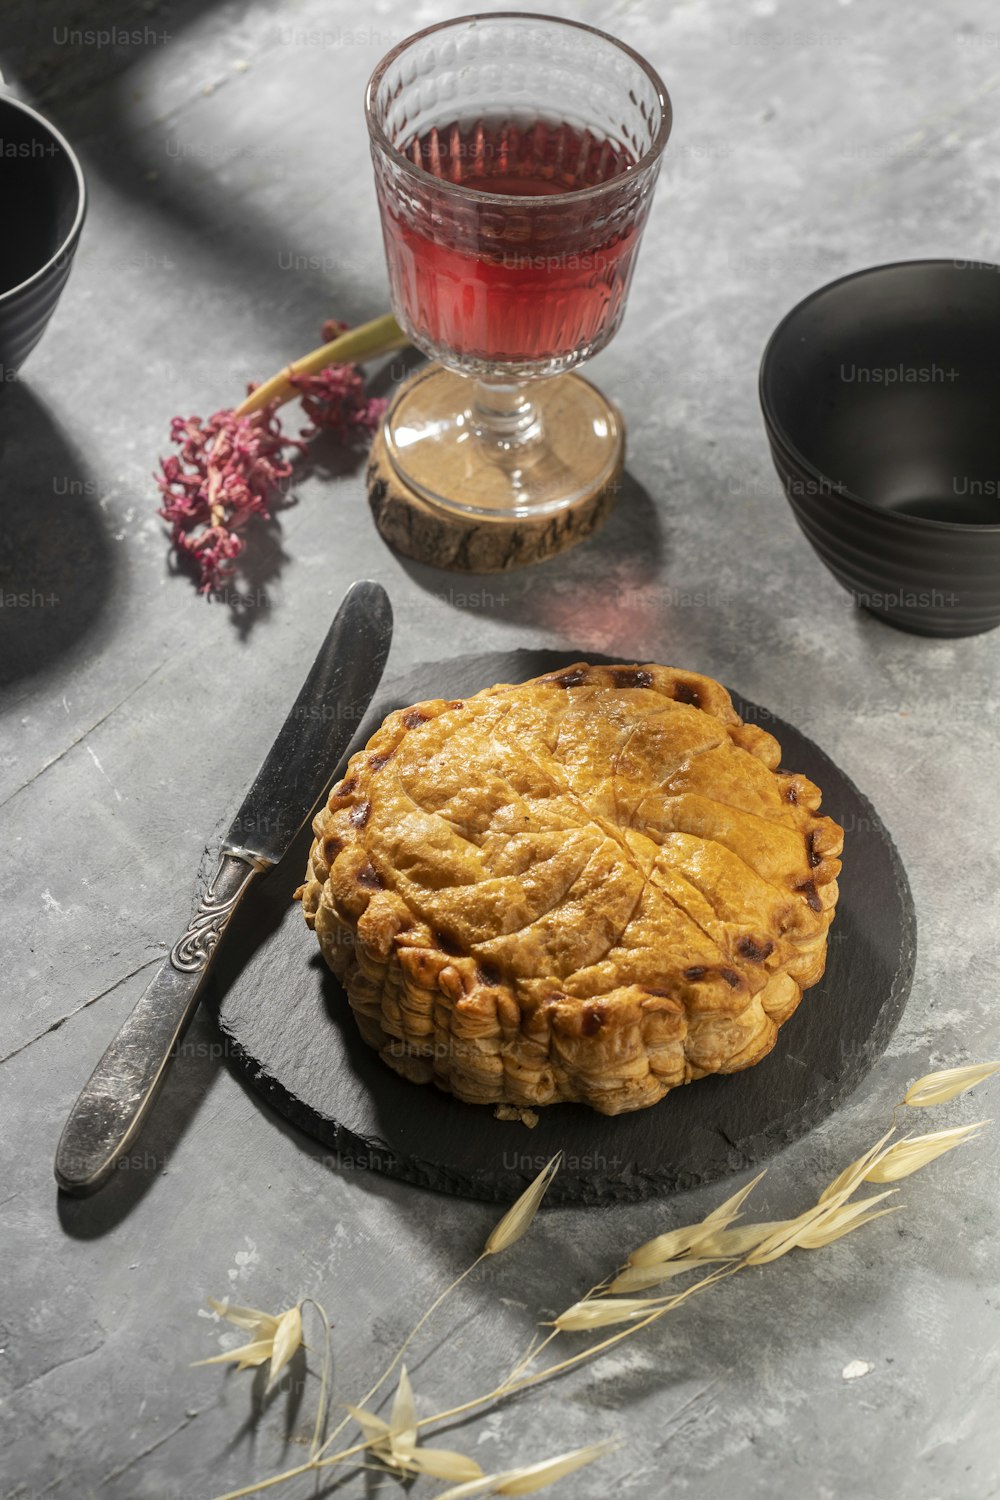 a pie sitting on top of a black plate next to a glass of wine